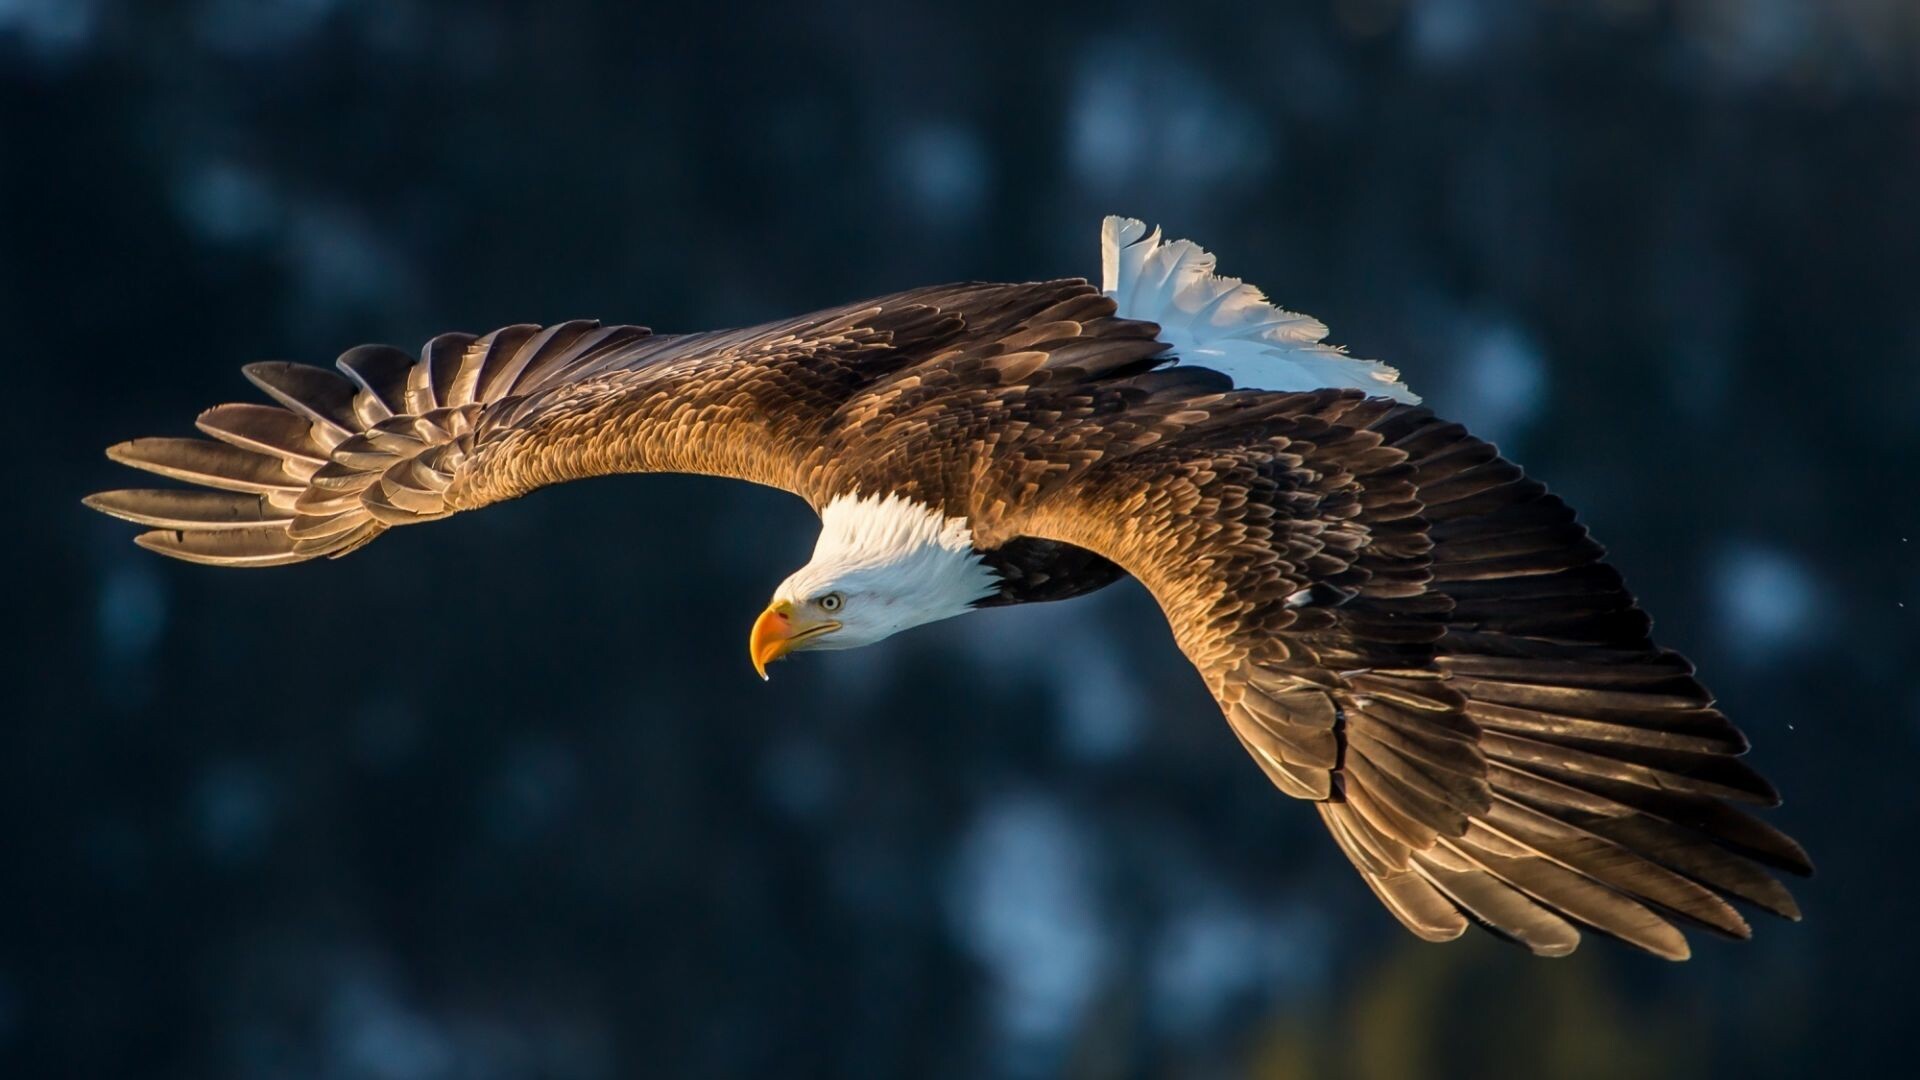 Eagle: Giant forest eagles feed on various forest animals. 1920x1080 Full HD Wallpaper.